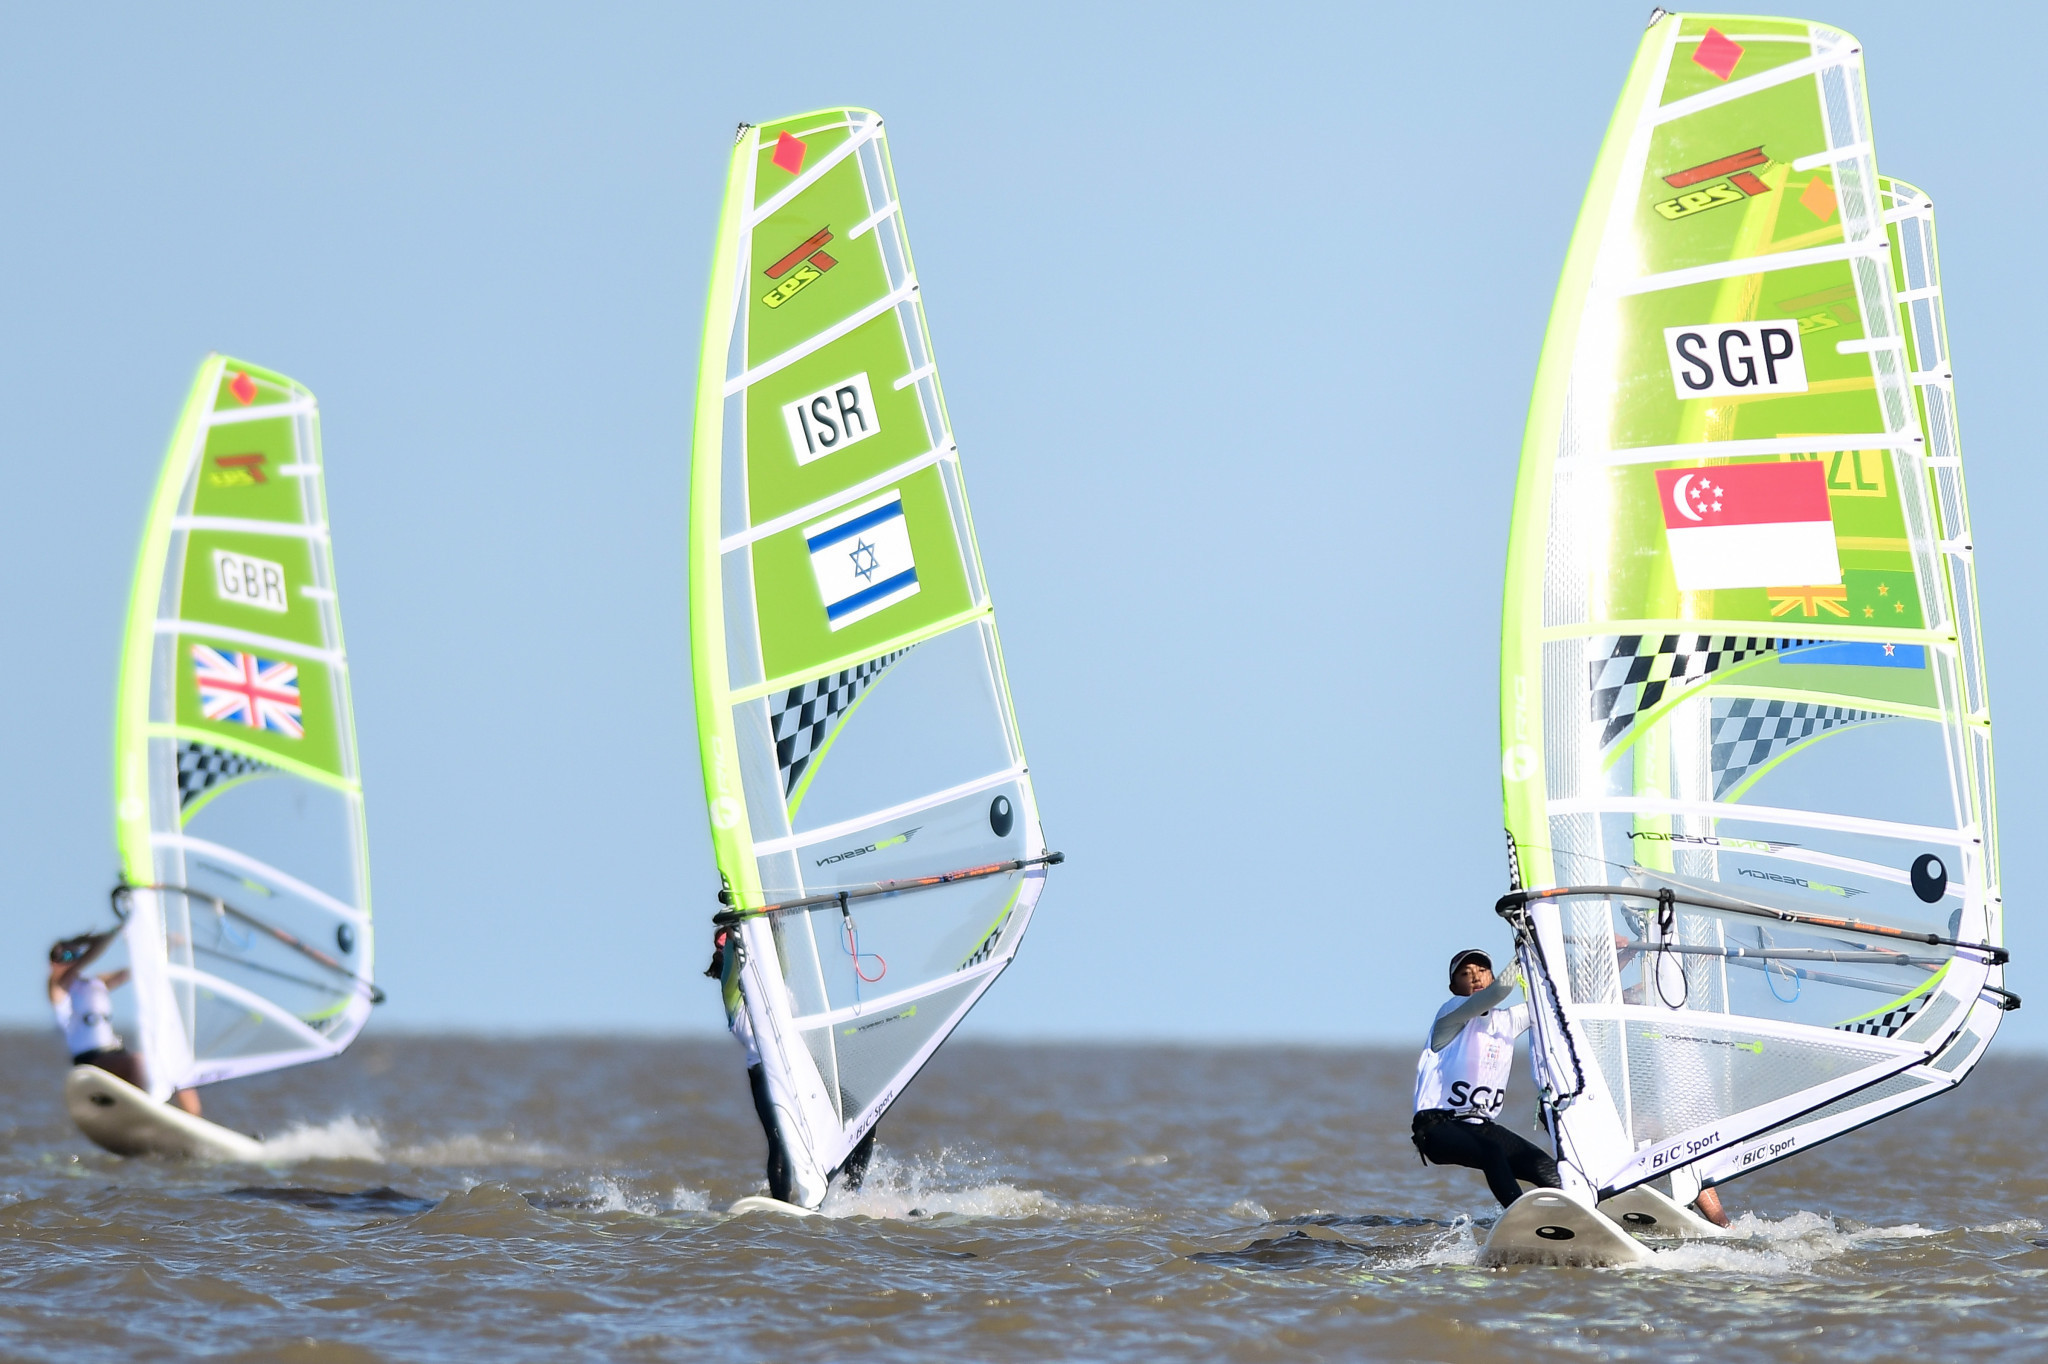 Windsurfing competition began on day one in Buenos Aires ©Getty Images